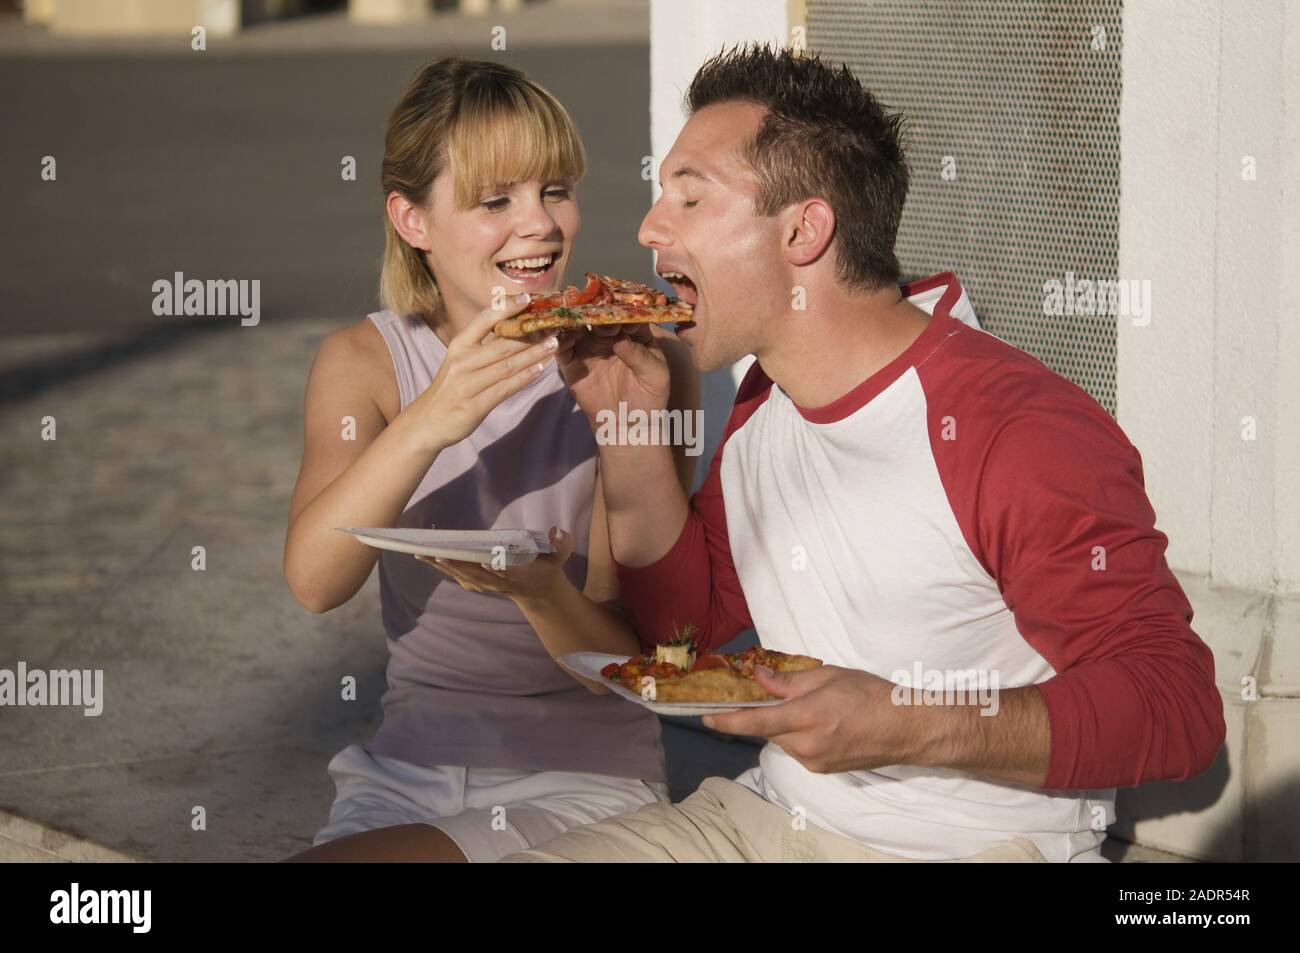 Junges Paar isst eine Pizzaschnitte - Young couple eating pizza outdoors Stock Photo